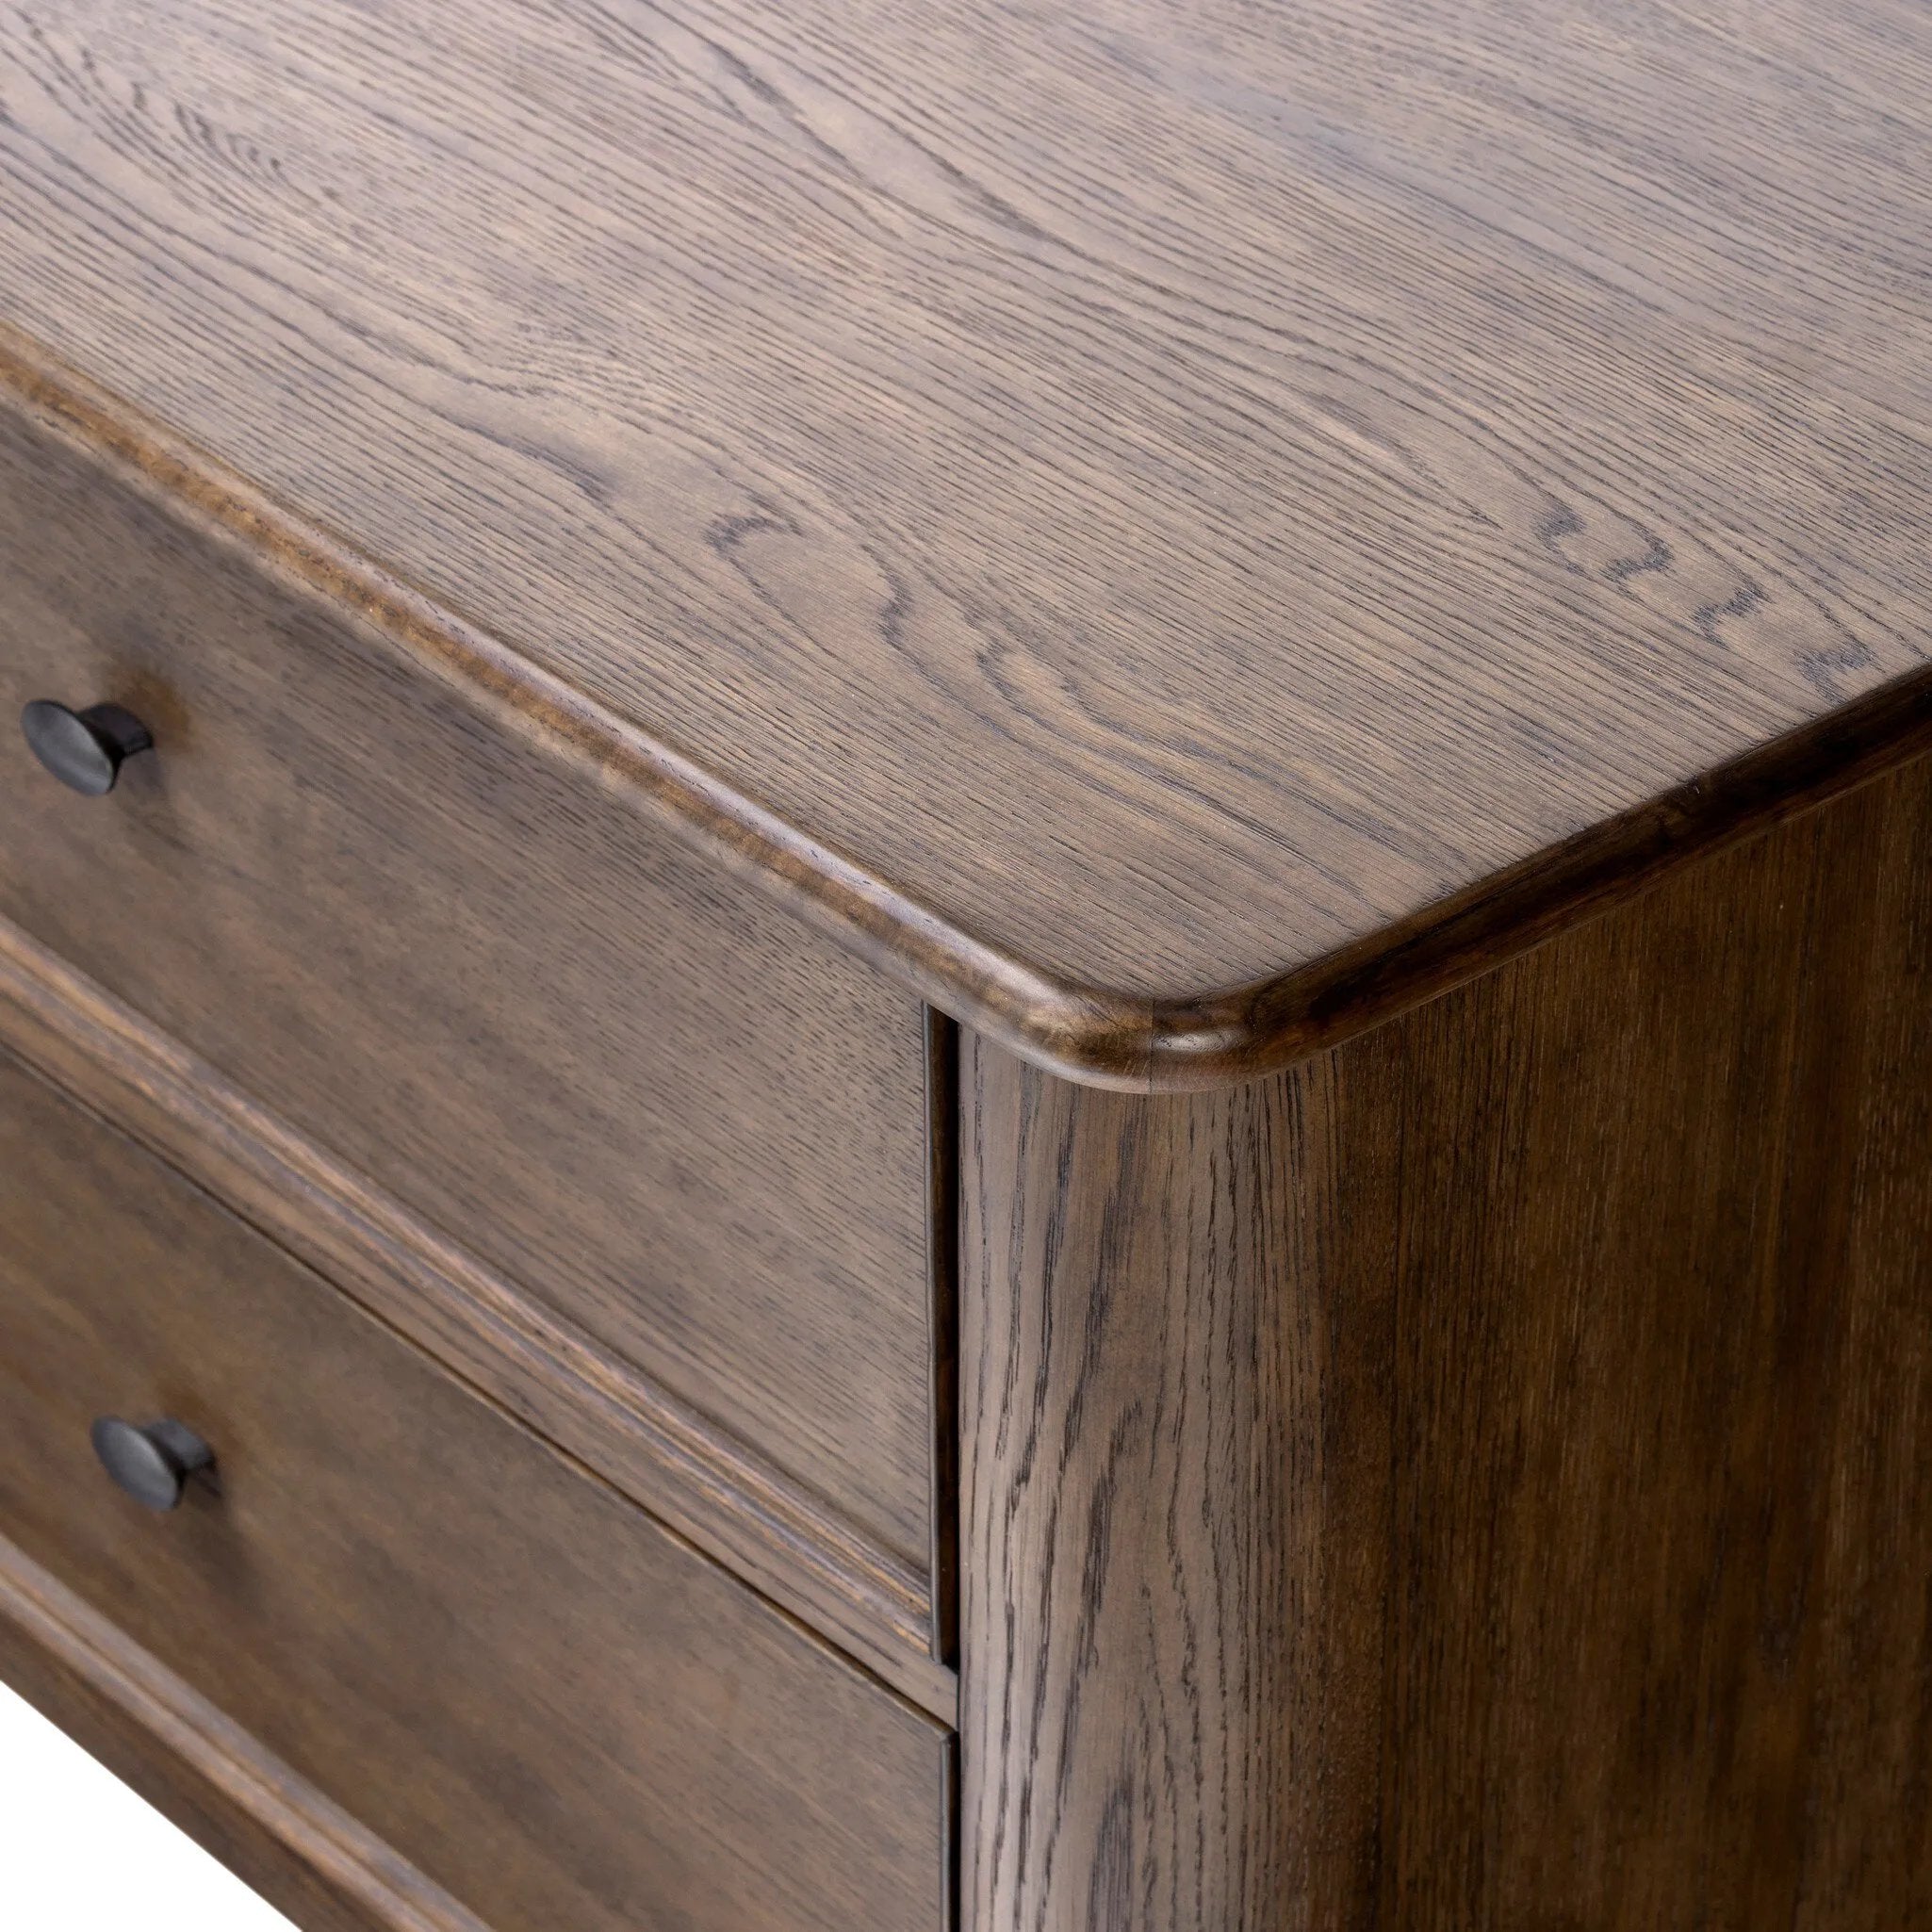 Like an heirloom nightstand with two roomy drawers, this aged oak design has room for it all. Detailed with an overhang surface, carved edges top to bottom, angled legs and oval drawer pulls finished in dark gunmetal.Collection: Bolto Amethyst Home provides interior design, new home construction design consulting, vintage area rugs, and lighting in the Calabasas metro area.